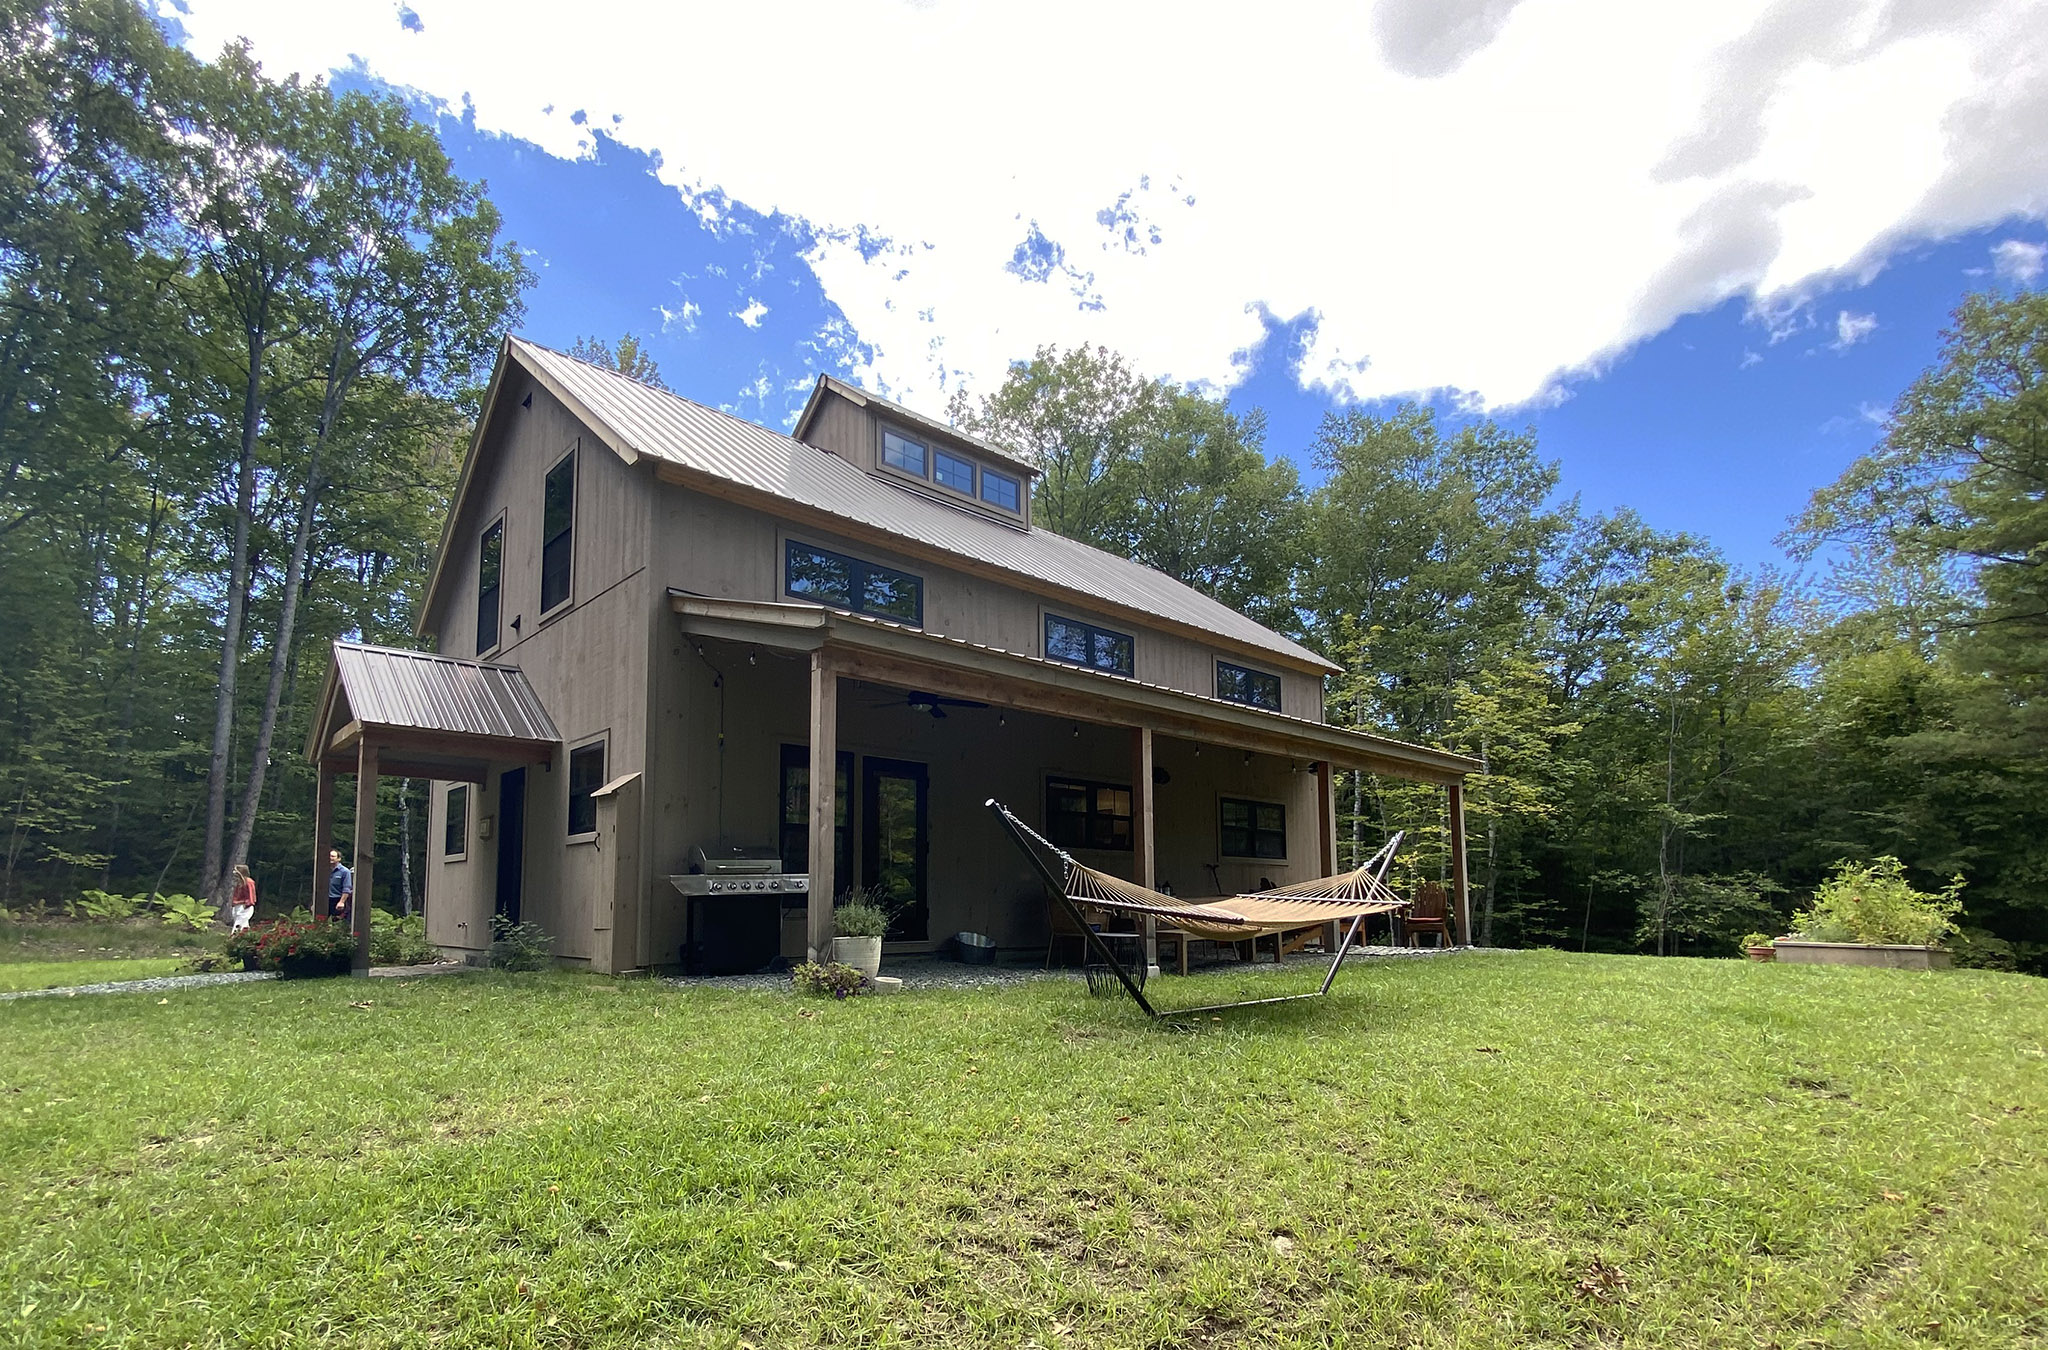 An exterior picture of the Forest Glade Retreat home, designed and built by Geobarns, with mocha wood siding, burnished bronze metal roof, front porch, side porch, and cupola.